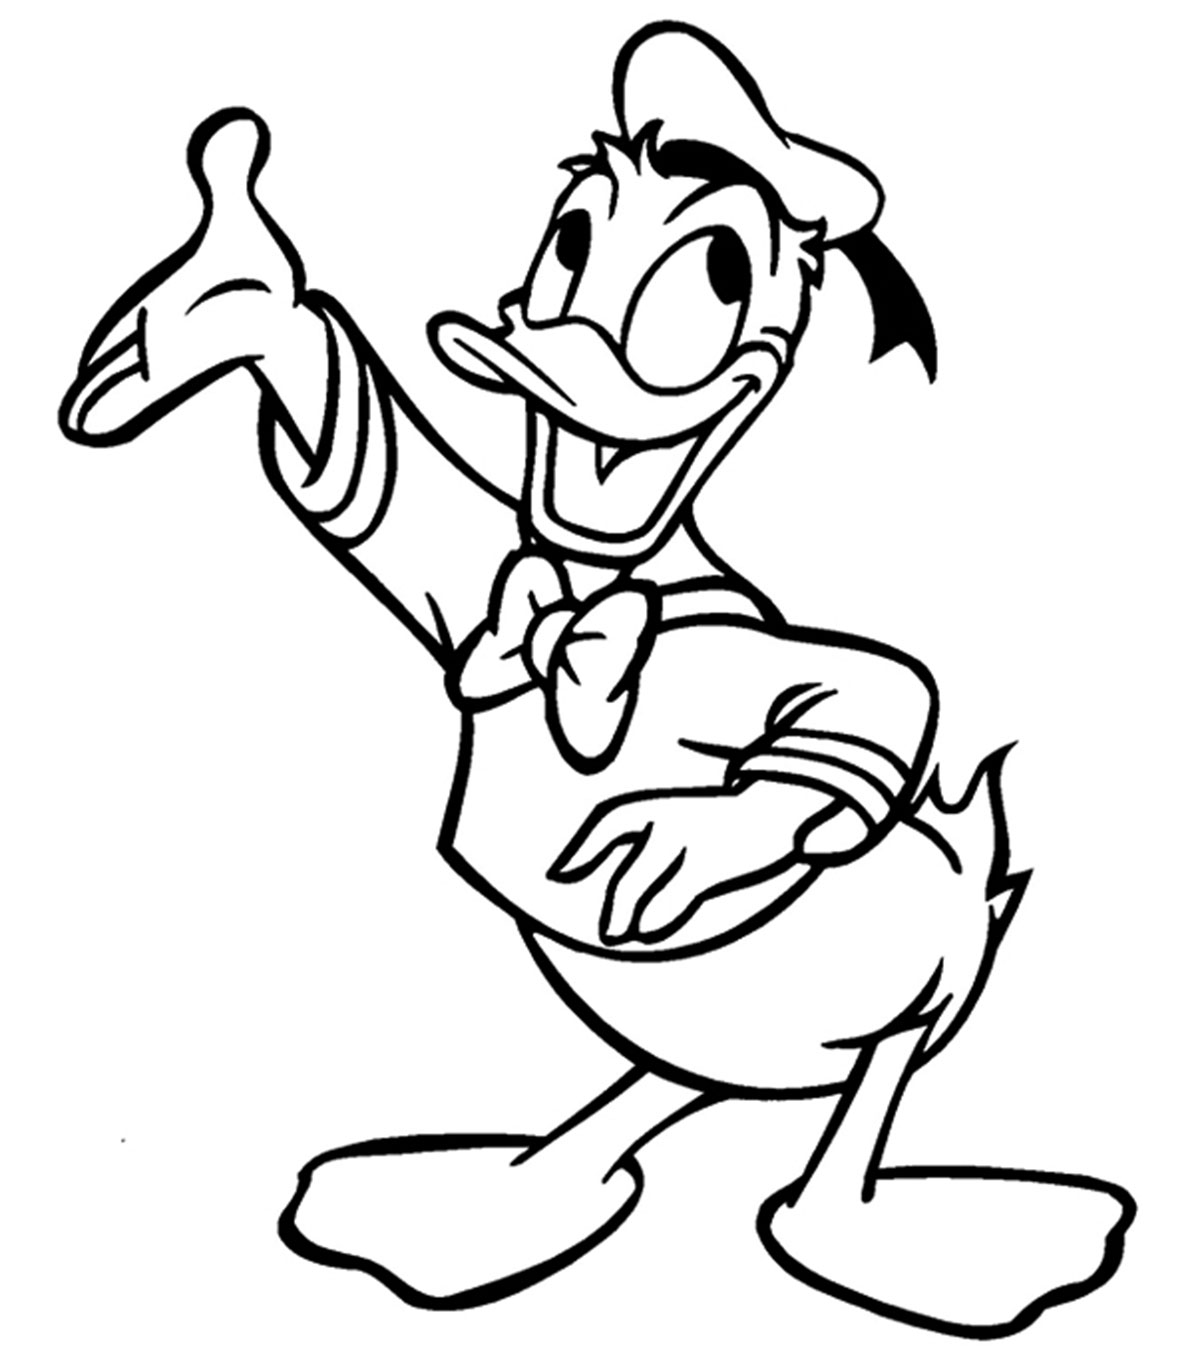 25 Cute Donald Duck Coloring Pages Your Toddler Will Love